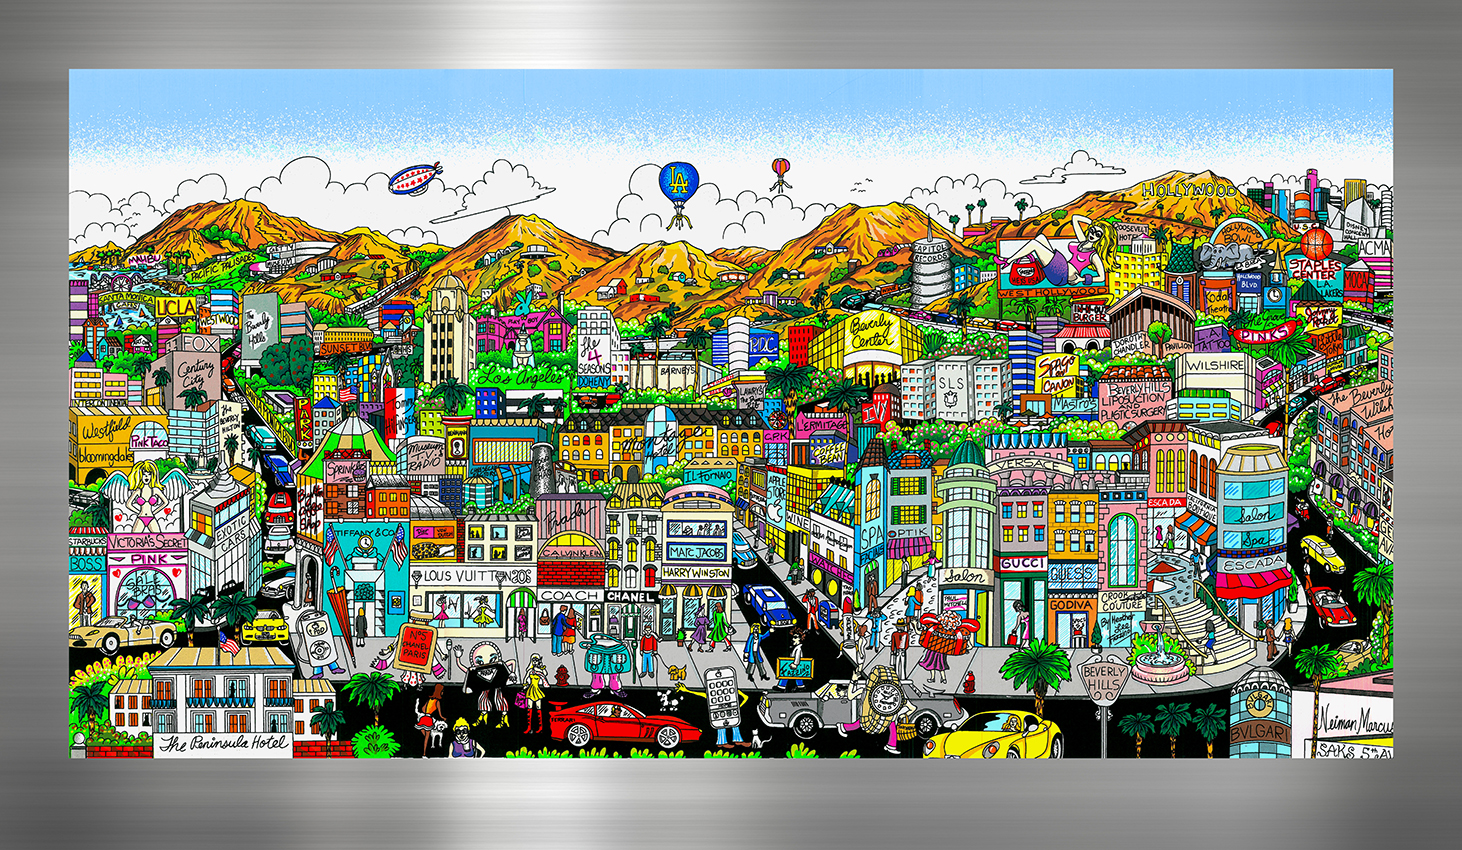 Charles Fazzino 3D Pop Art piece "You're Going to Hollywood"